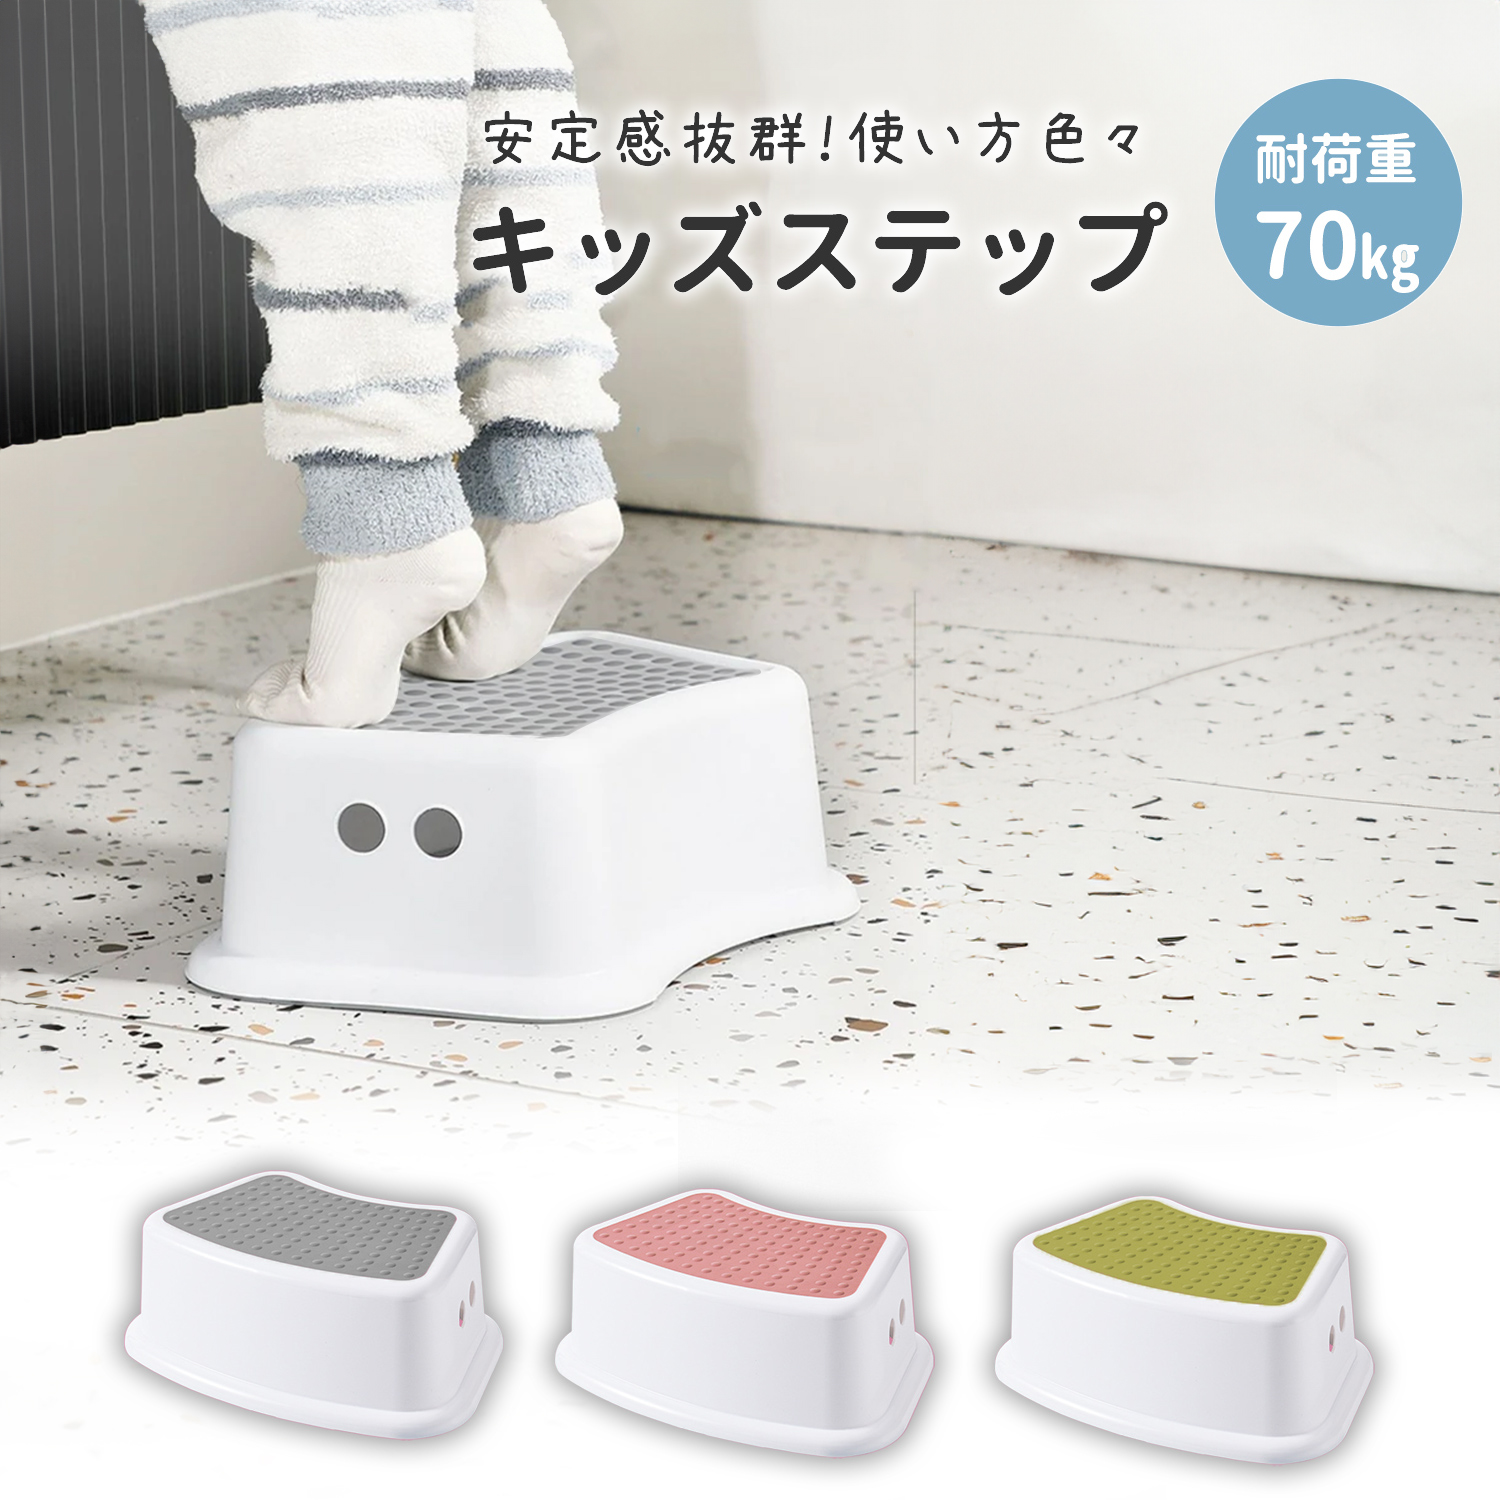  child step‐ladder toilet toilet step‐ladder child step child step‐ladder lavatory face washing pcs toilet training toy tore for infant step slip prevention attaching compact kitchen 